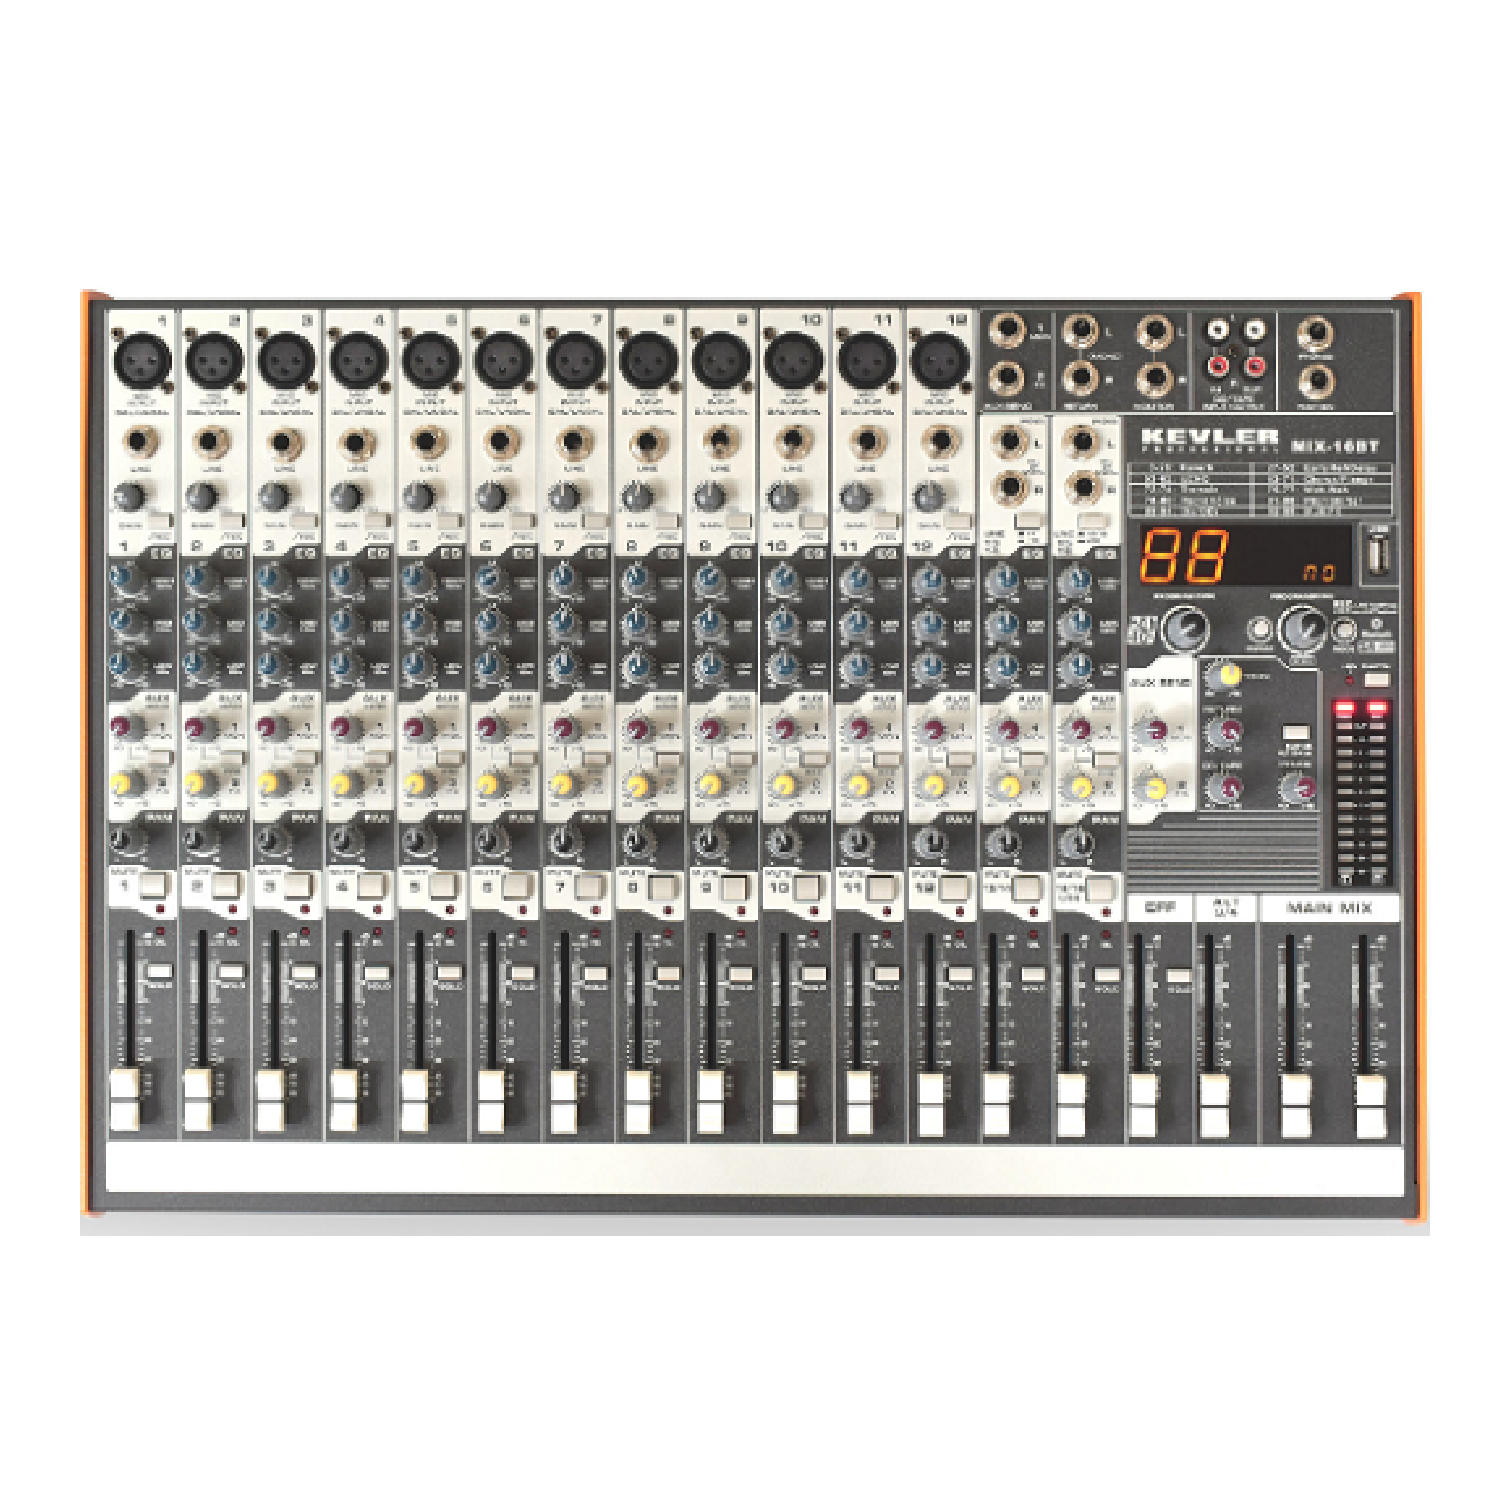 16 Channel 12 Mic / Line 2 AUX Mixer with 24 BIT 99 DSP with USB and Bluetooth   MIX16BT kevler